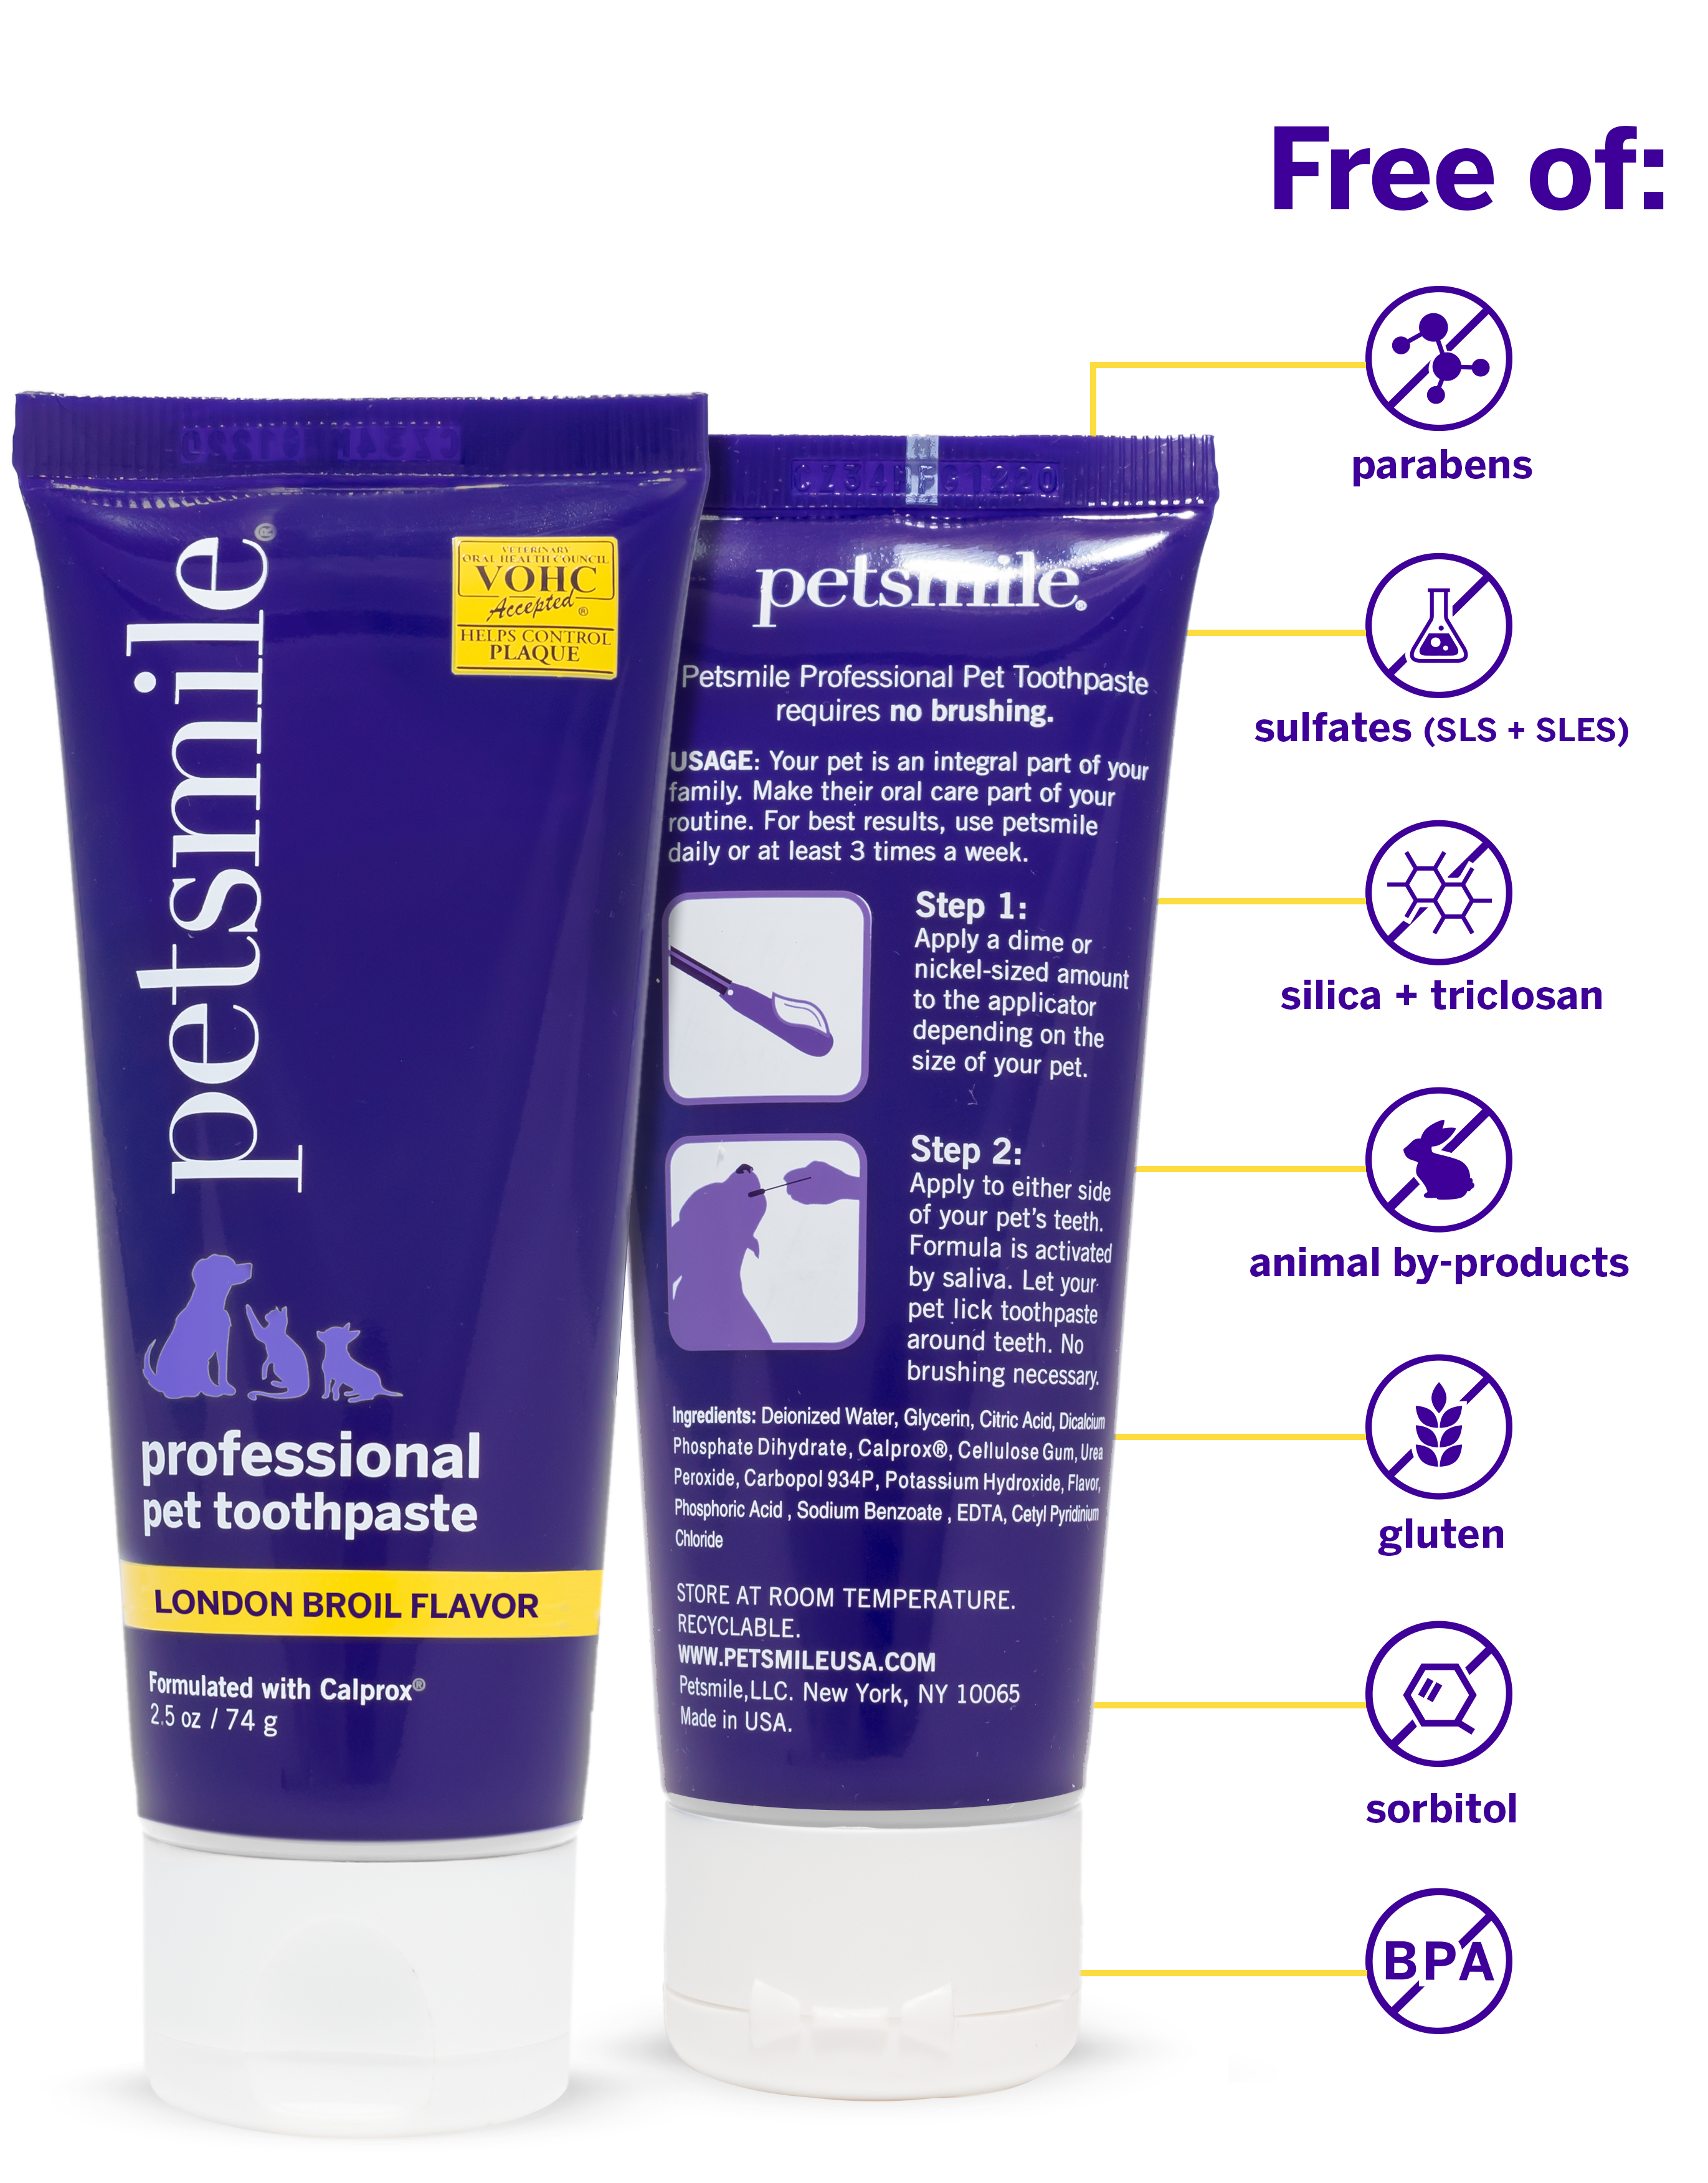 small tube of London Broil toothpaste , small purple tube of petsmile toothpaste , small petsmile professional pet toothpaste , BPA-free, safe for pets , Vegan-friendly, cruelty-free-product , Reduce plaque and gingivitis